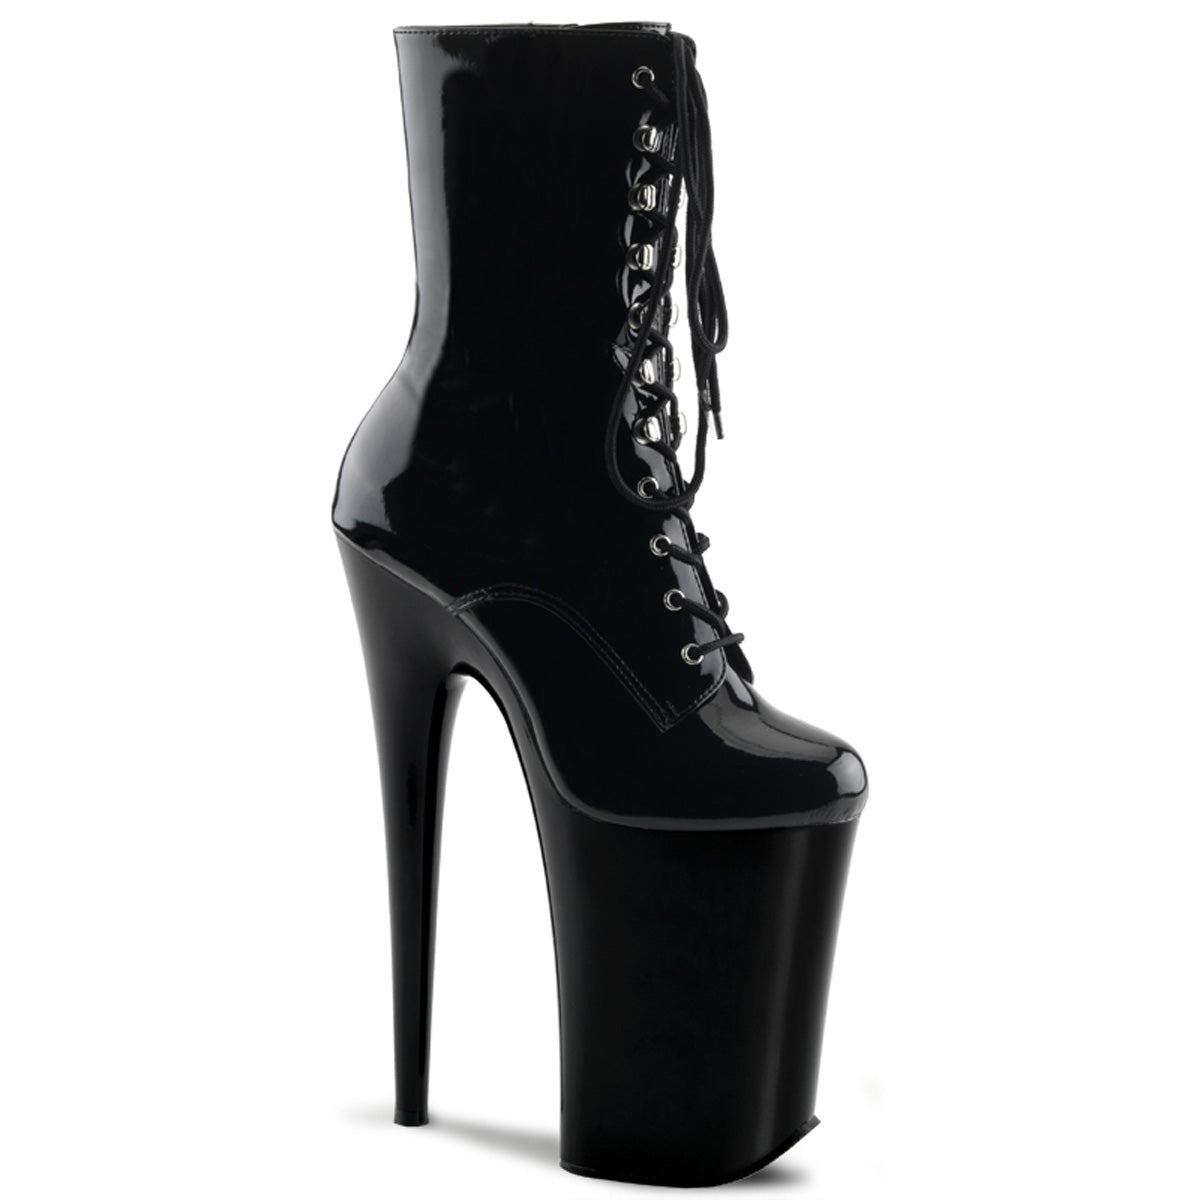 INFINITY-1020 Pleaser 9" Heel Black Stripper Platforms Lace Up Ankle Boots